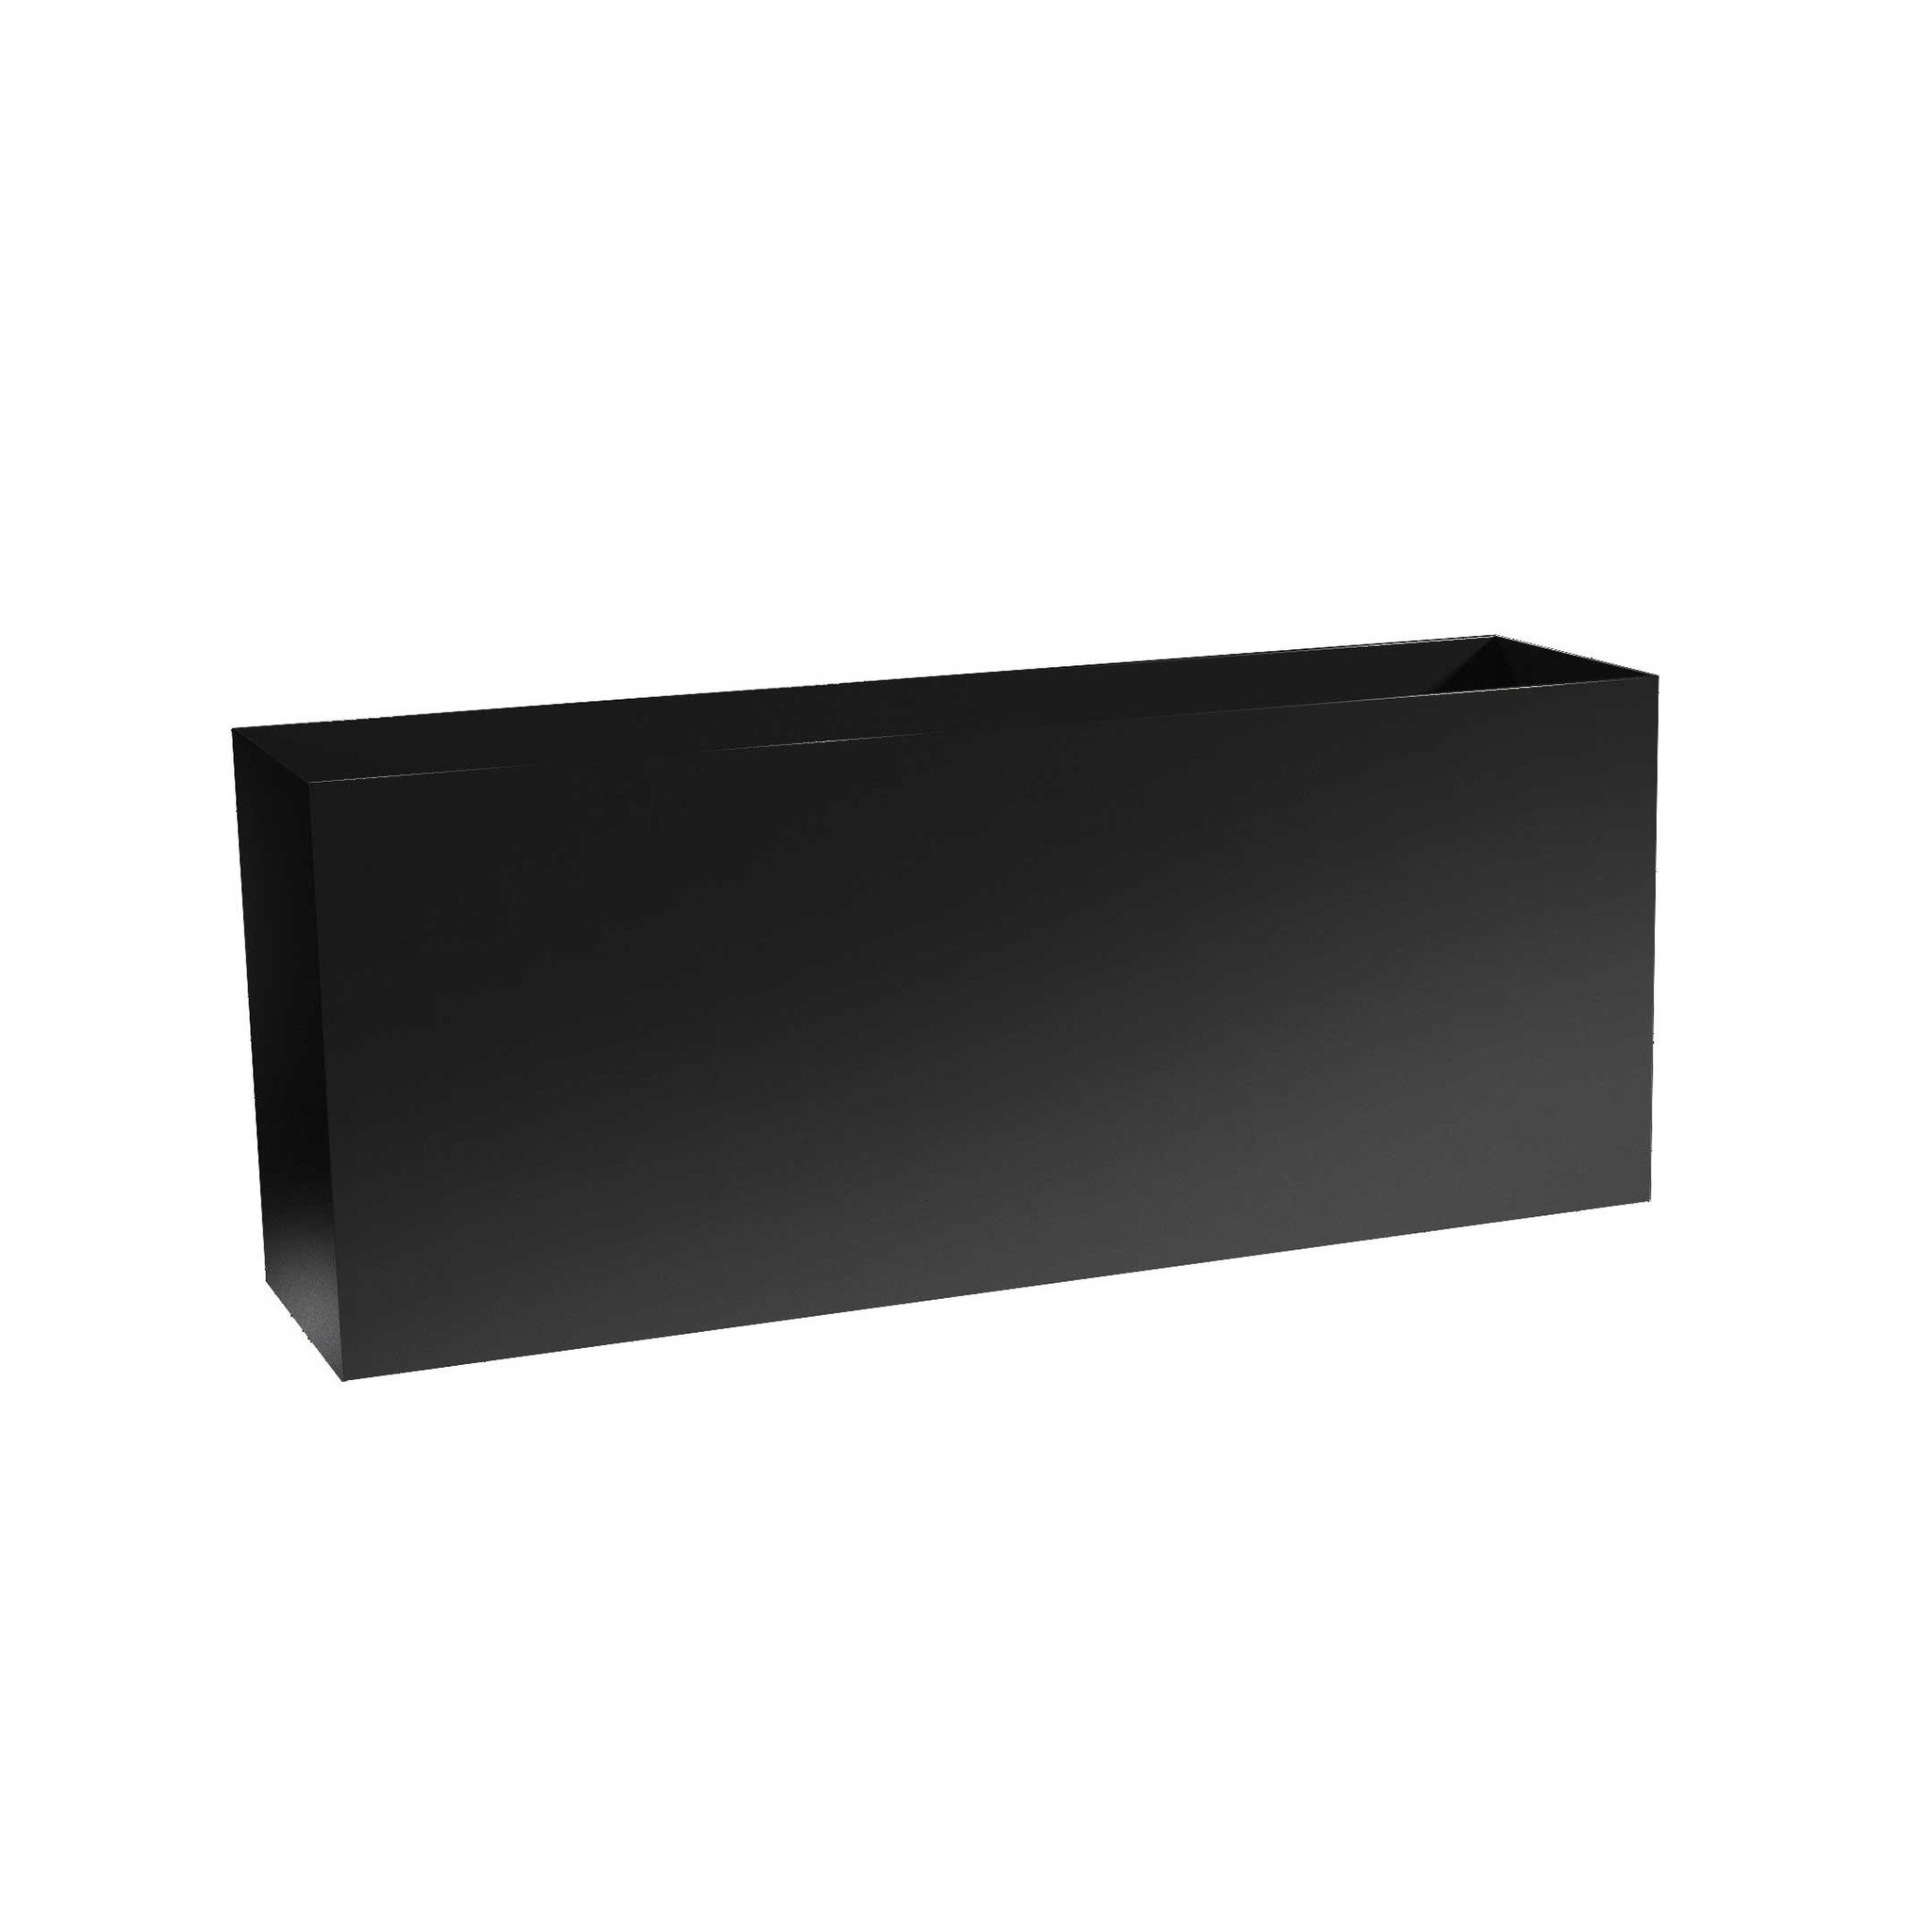 Low Profile Metal Planter Boxes - Aluminum - 16' Tall, (32'/36'/40'/46' Length; 10' Width)